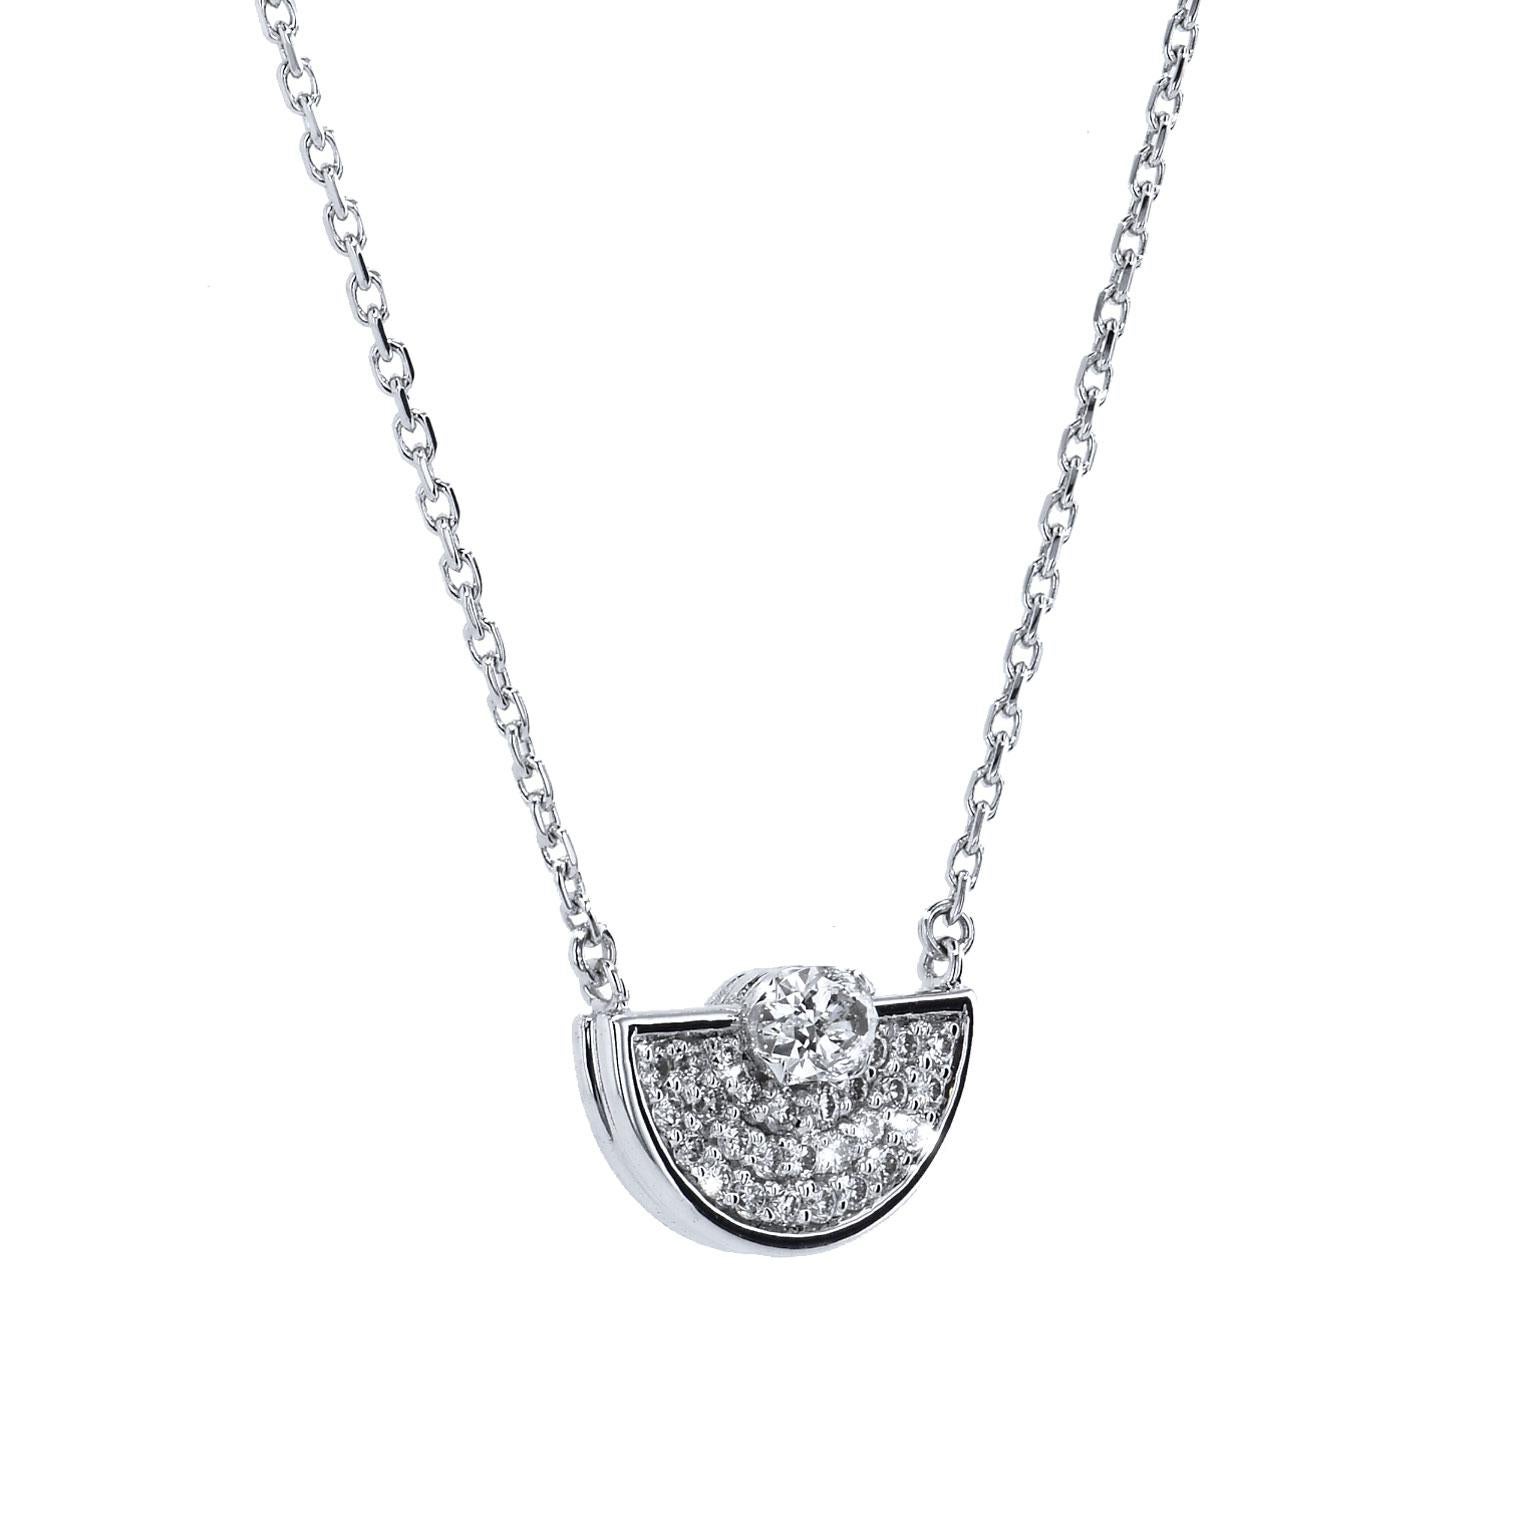 Diamond Half Circle 18 Karat White Gold Pendant Necklace

Prong and pave-set diamonds come together in in a half circle orientation  Fashioned in 18 karat white gold, the pendant features 0.27 carat of pave-set diamonds with a 0.25 carat round